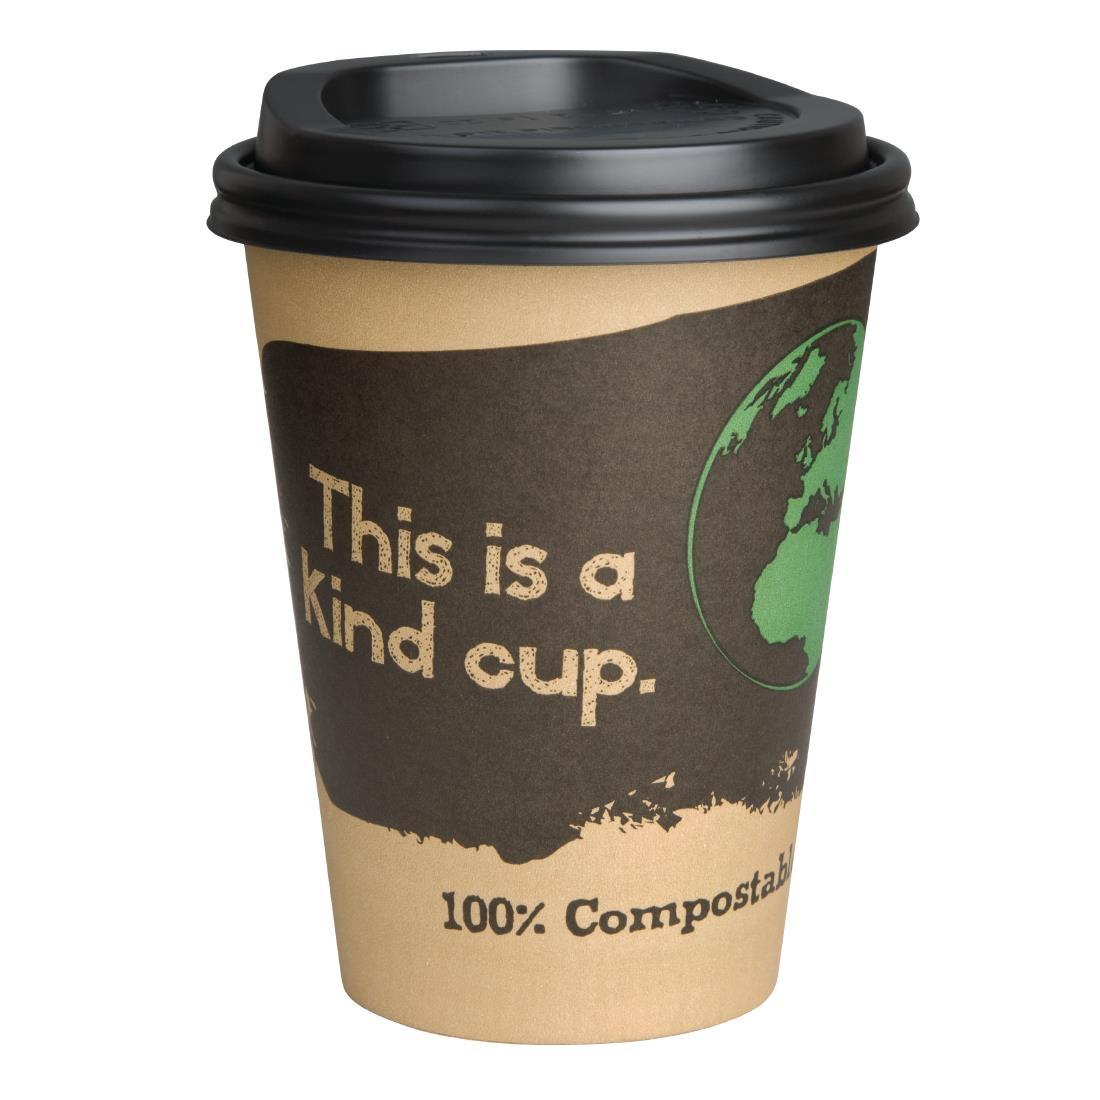 Fiesta Green 8oz Compostable Hot Cups and Lids Bundle (Pack of 1000) - SA484  - 2